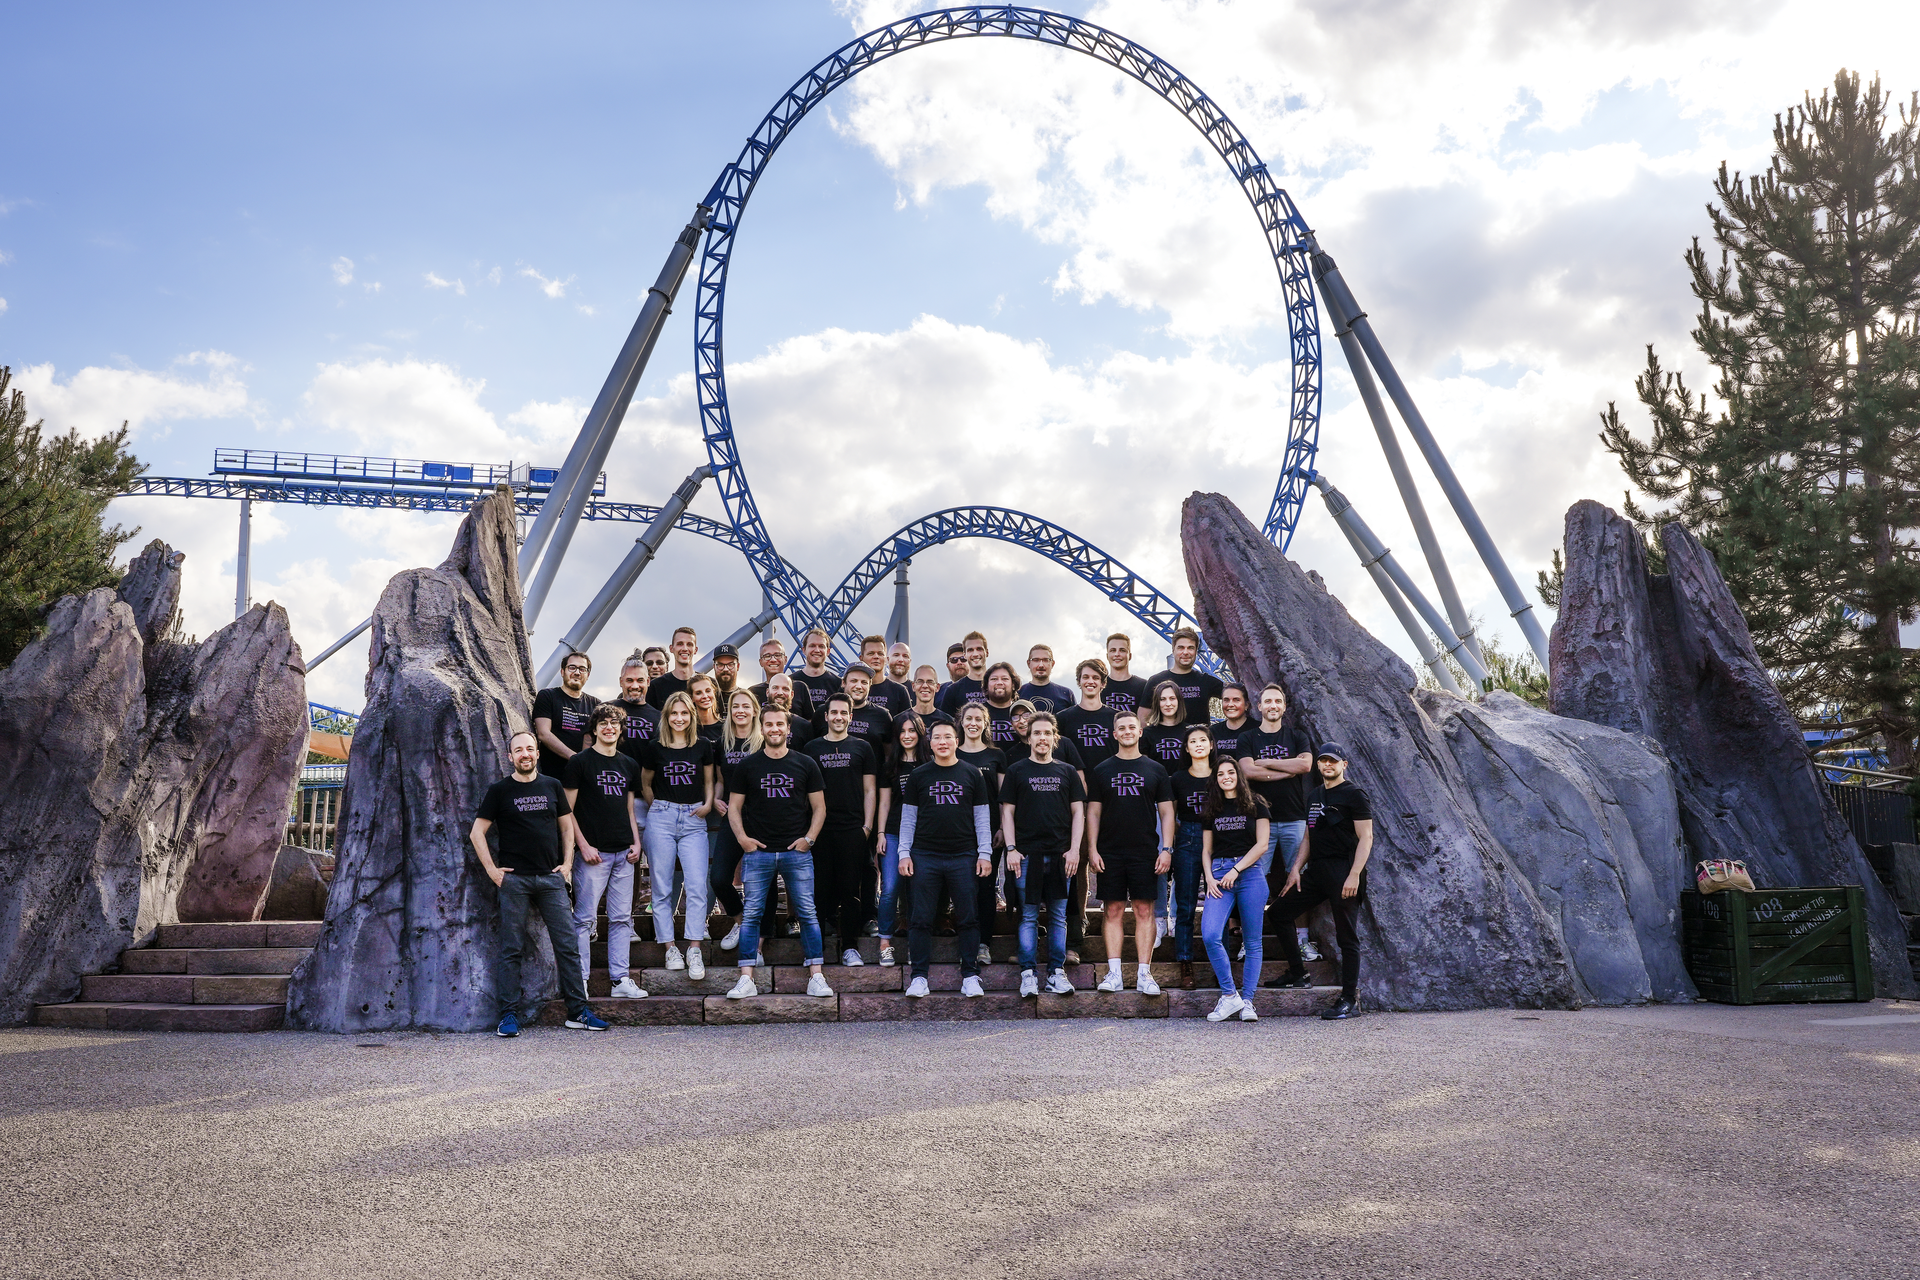 holoride team in front of a rollercoaster